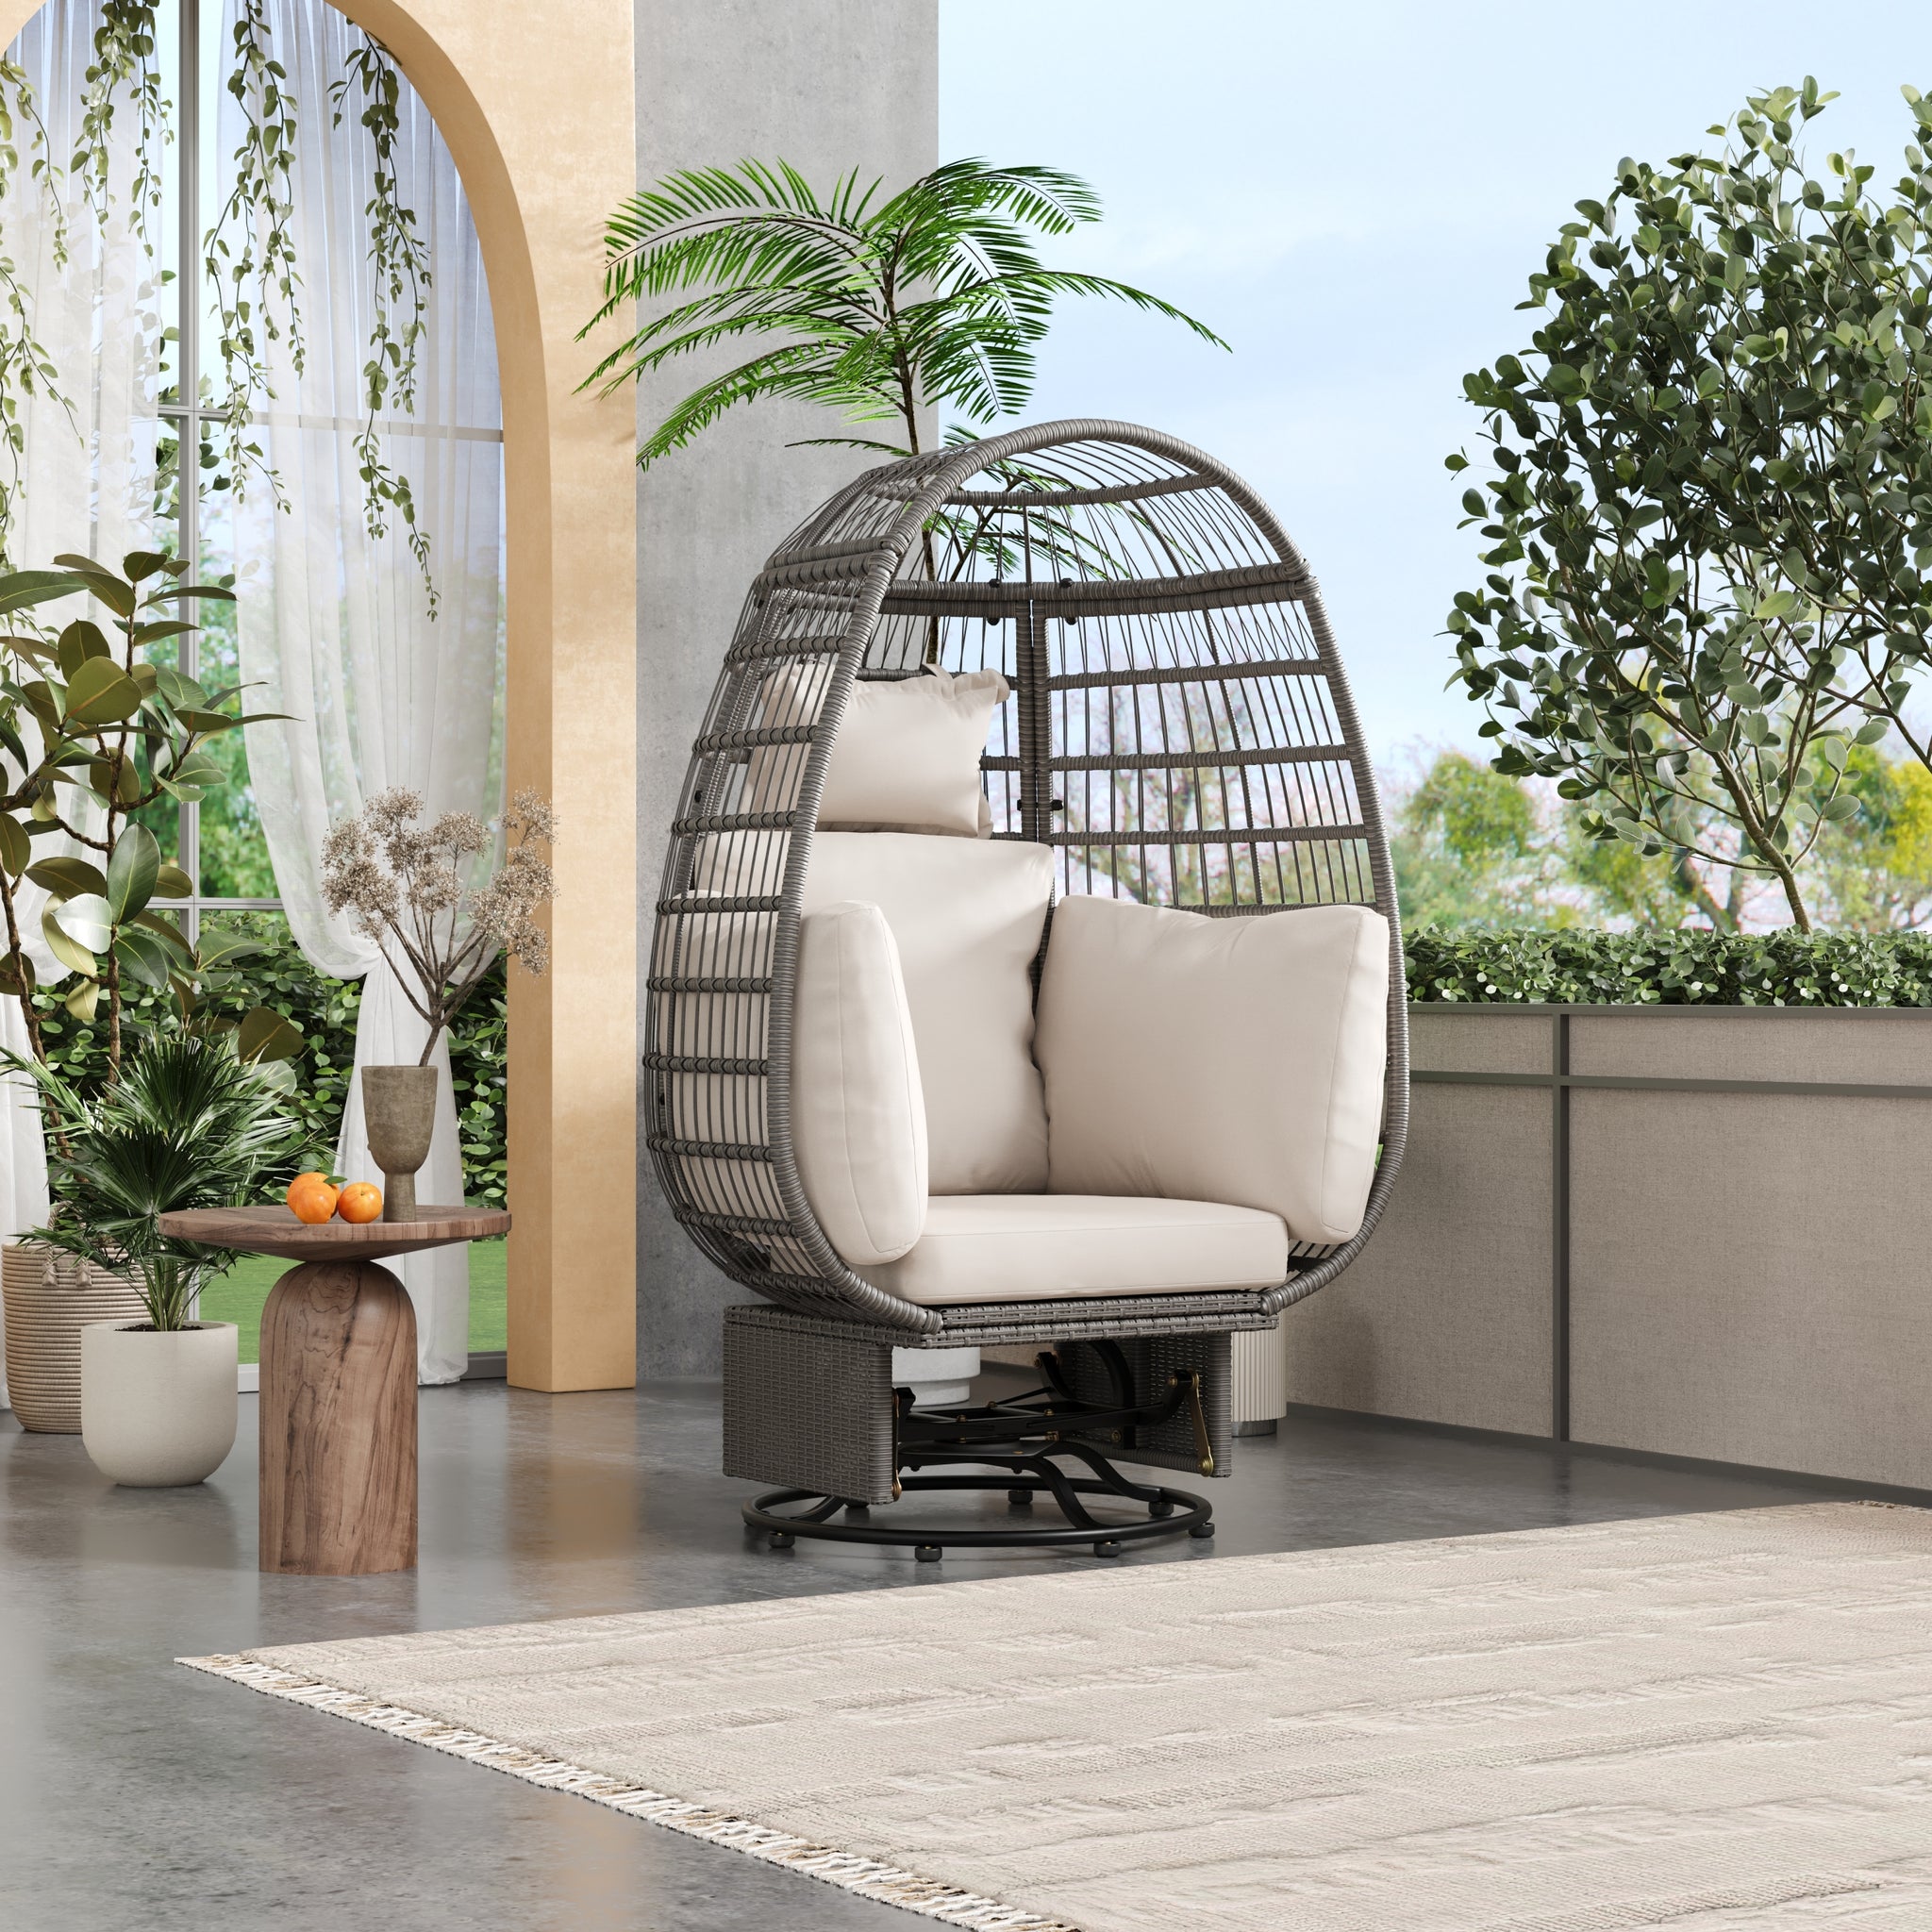 Outdoor Swivel Chair with Cushions, Rattan Egg beige+grey-wicker